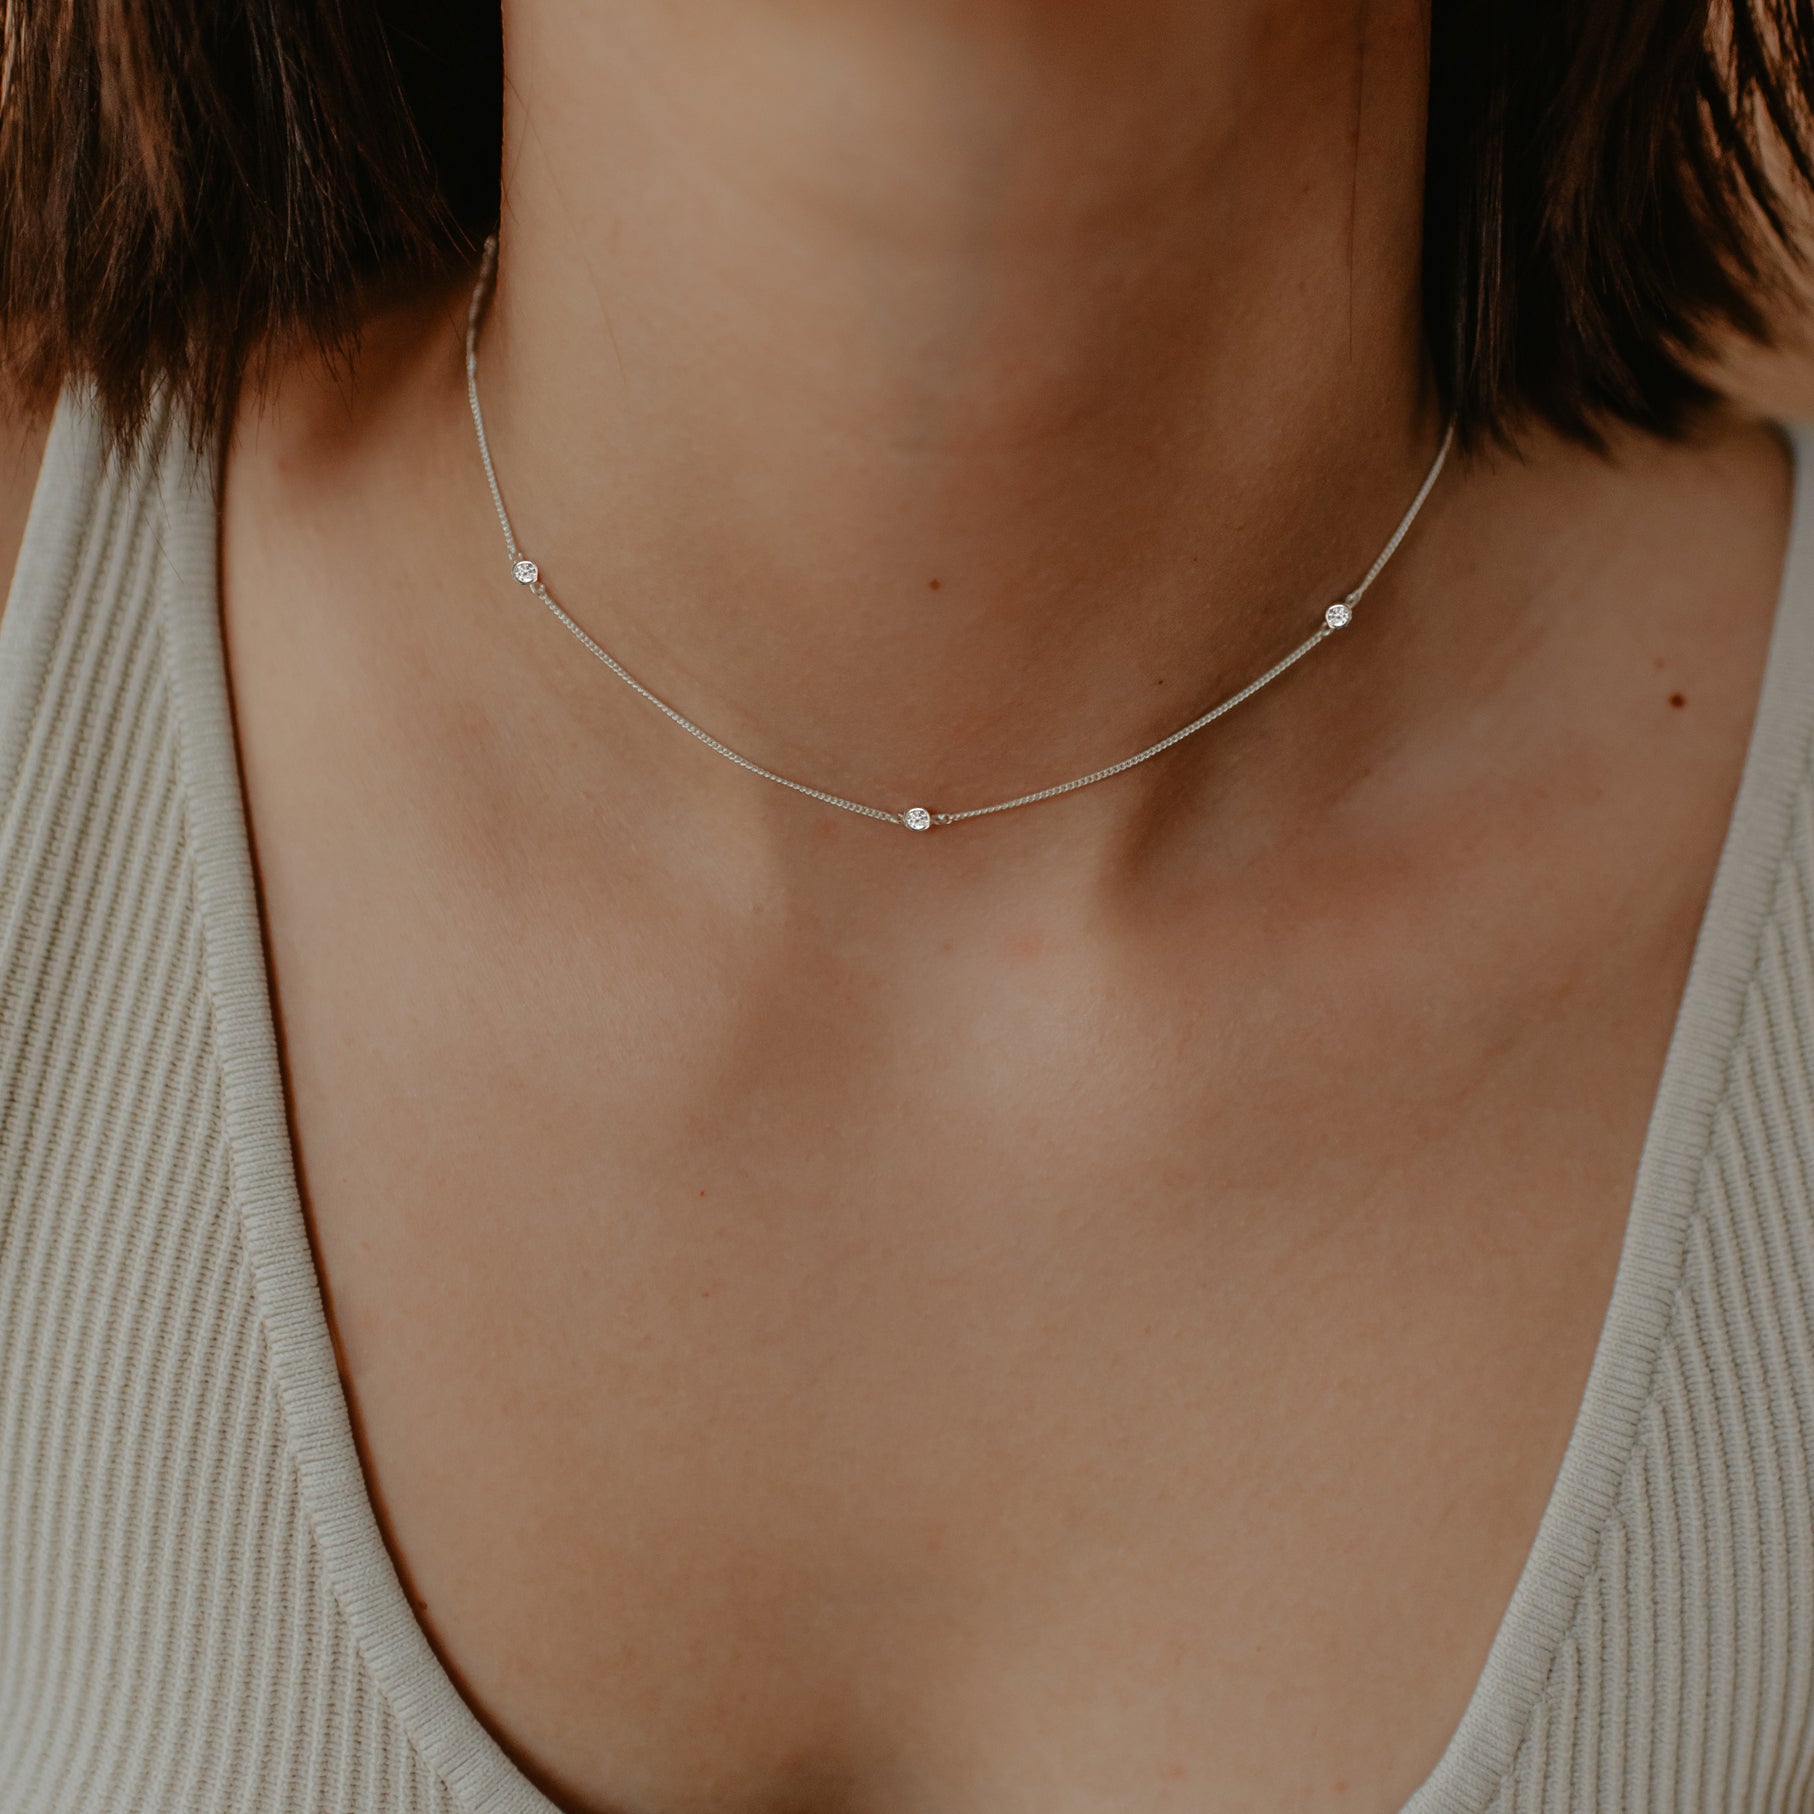 Amazon.com: MBW Simple Layered Necklaces for Women, Dainty Silver Plated  Satellite Chain Necklace for Women layering Necklaces Thin Choker Stacked Necklace  Silver Jewelry Set Gift for Women Girls: Clothing, Shoes & Jewelry